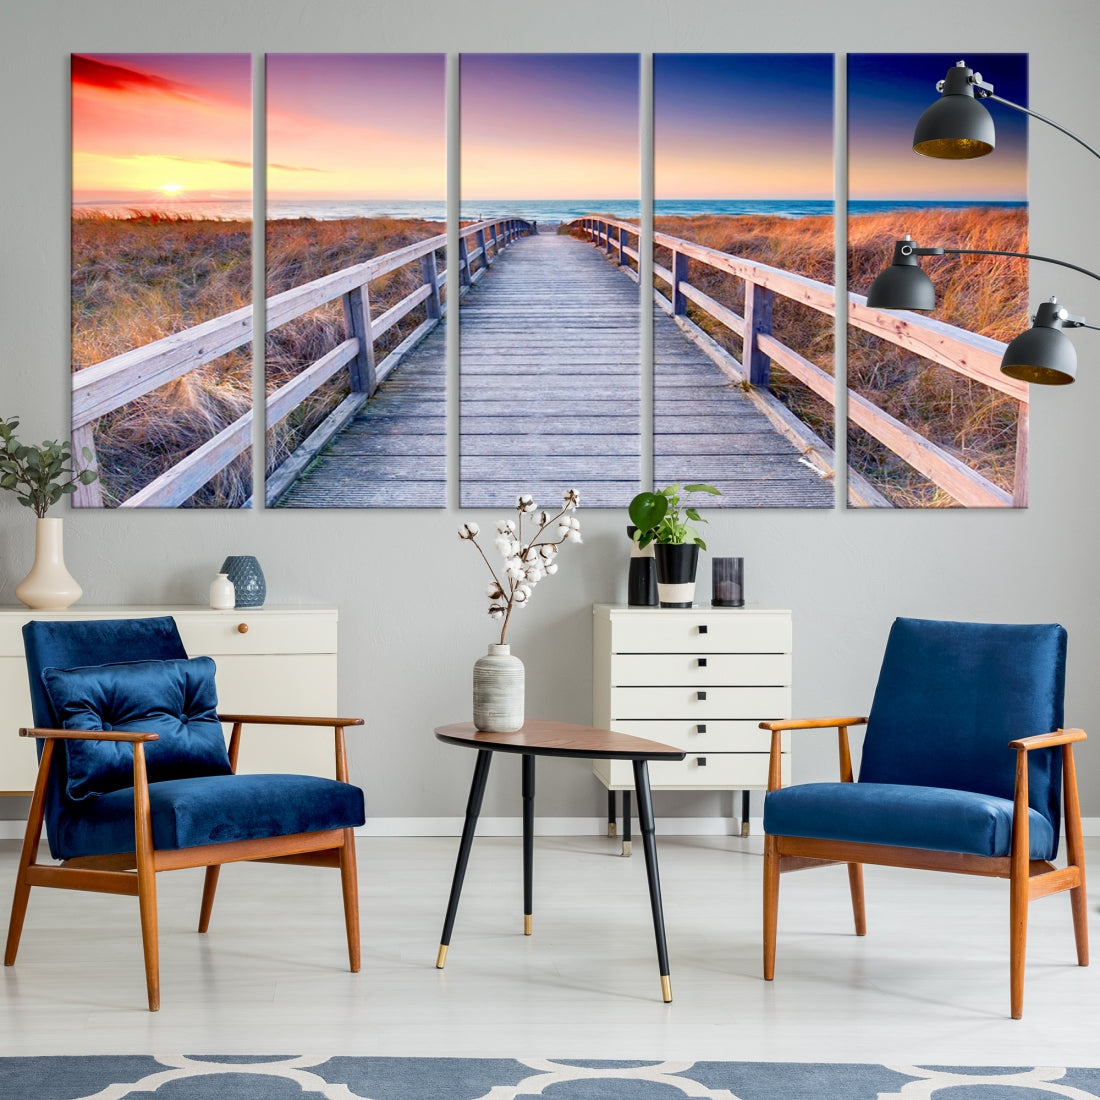 Sea Ocean Sunset Beach to Your Home with Our Wall Art Canvas PrintA Relaxing Decor Piece